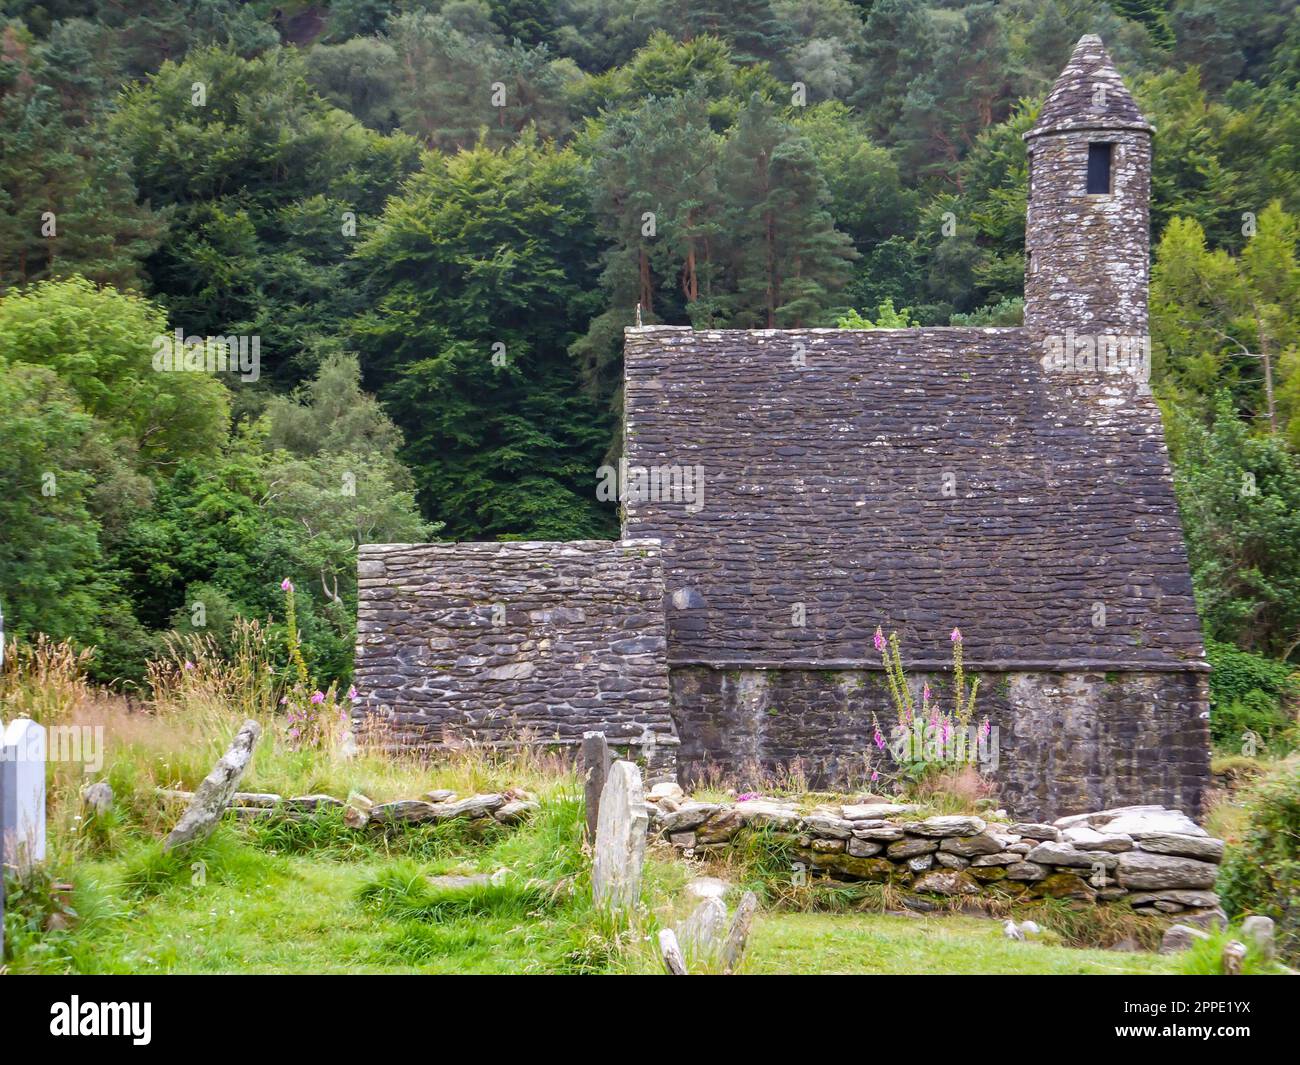 The ancient Saint Kevin's Kitchen at the Glendalough Monastic City in Wicklow Mountains National Park, Ireland. Stock Photo